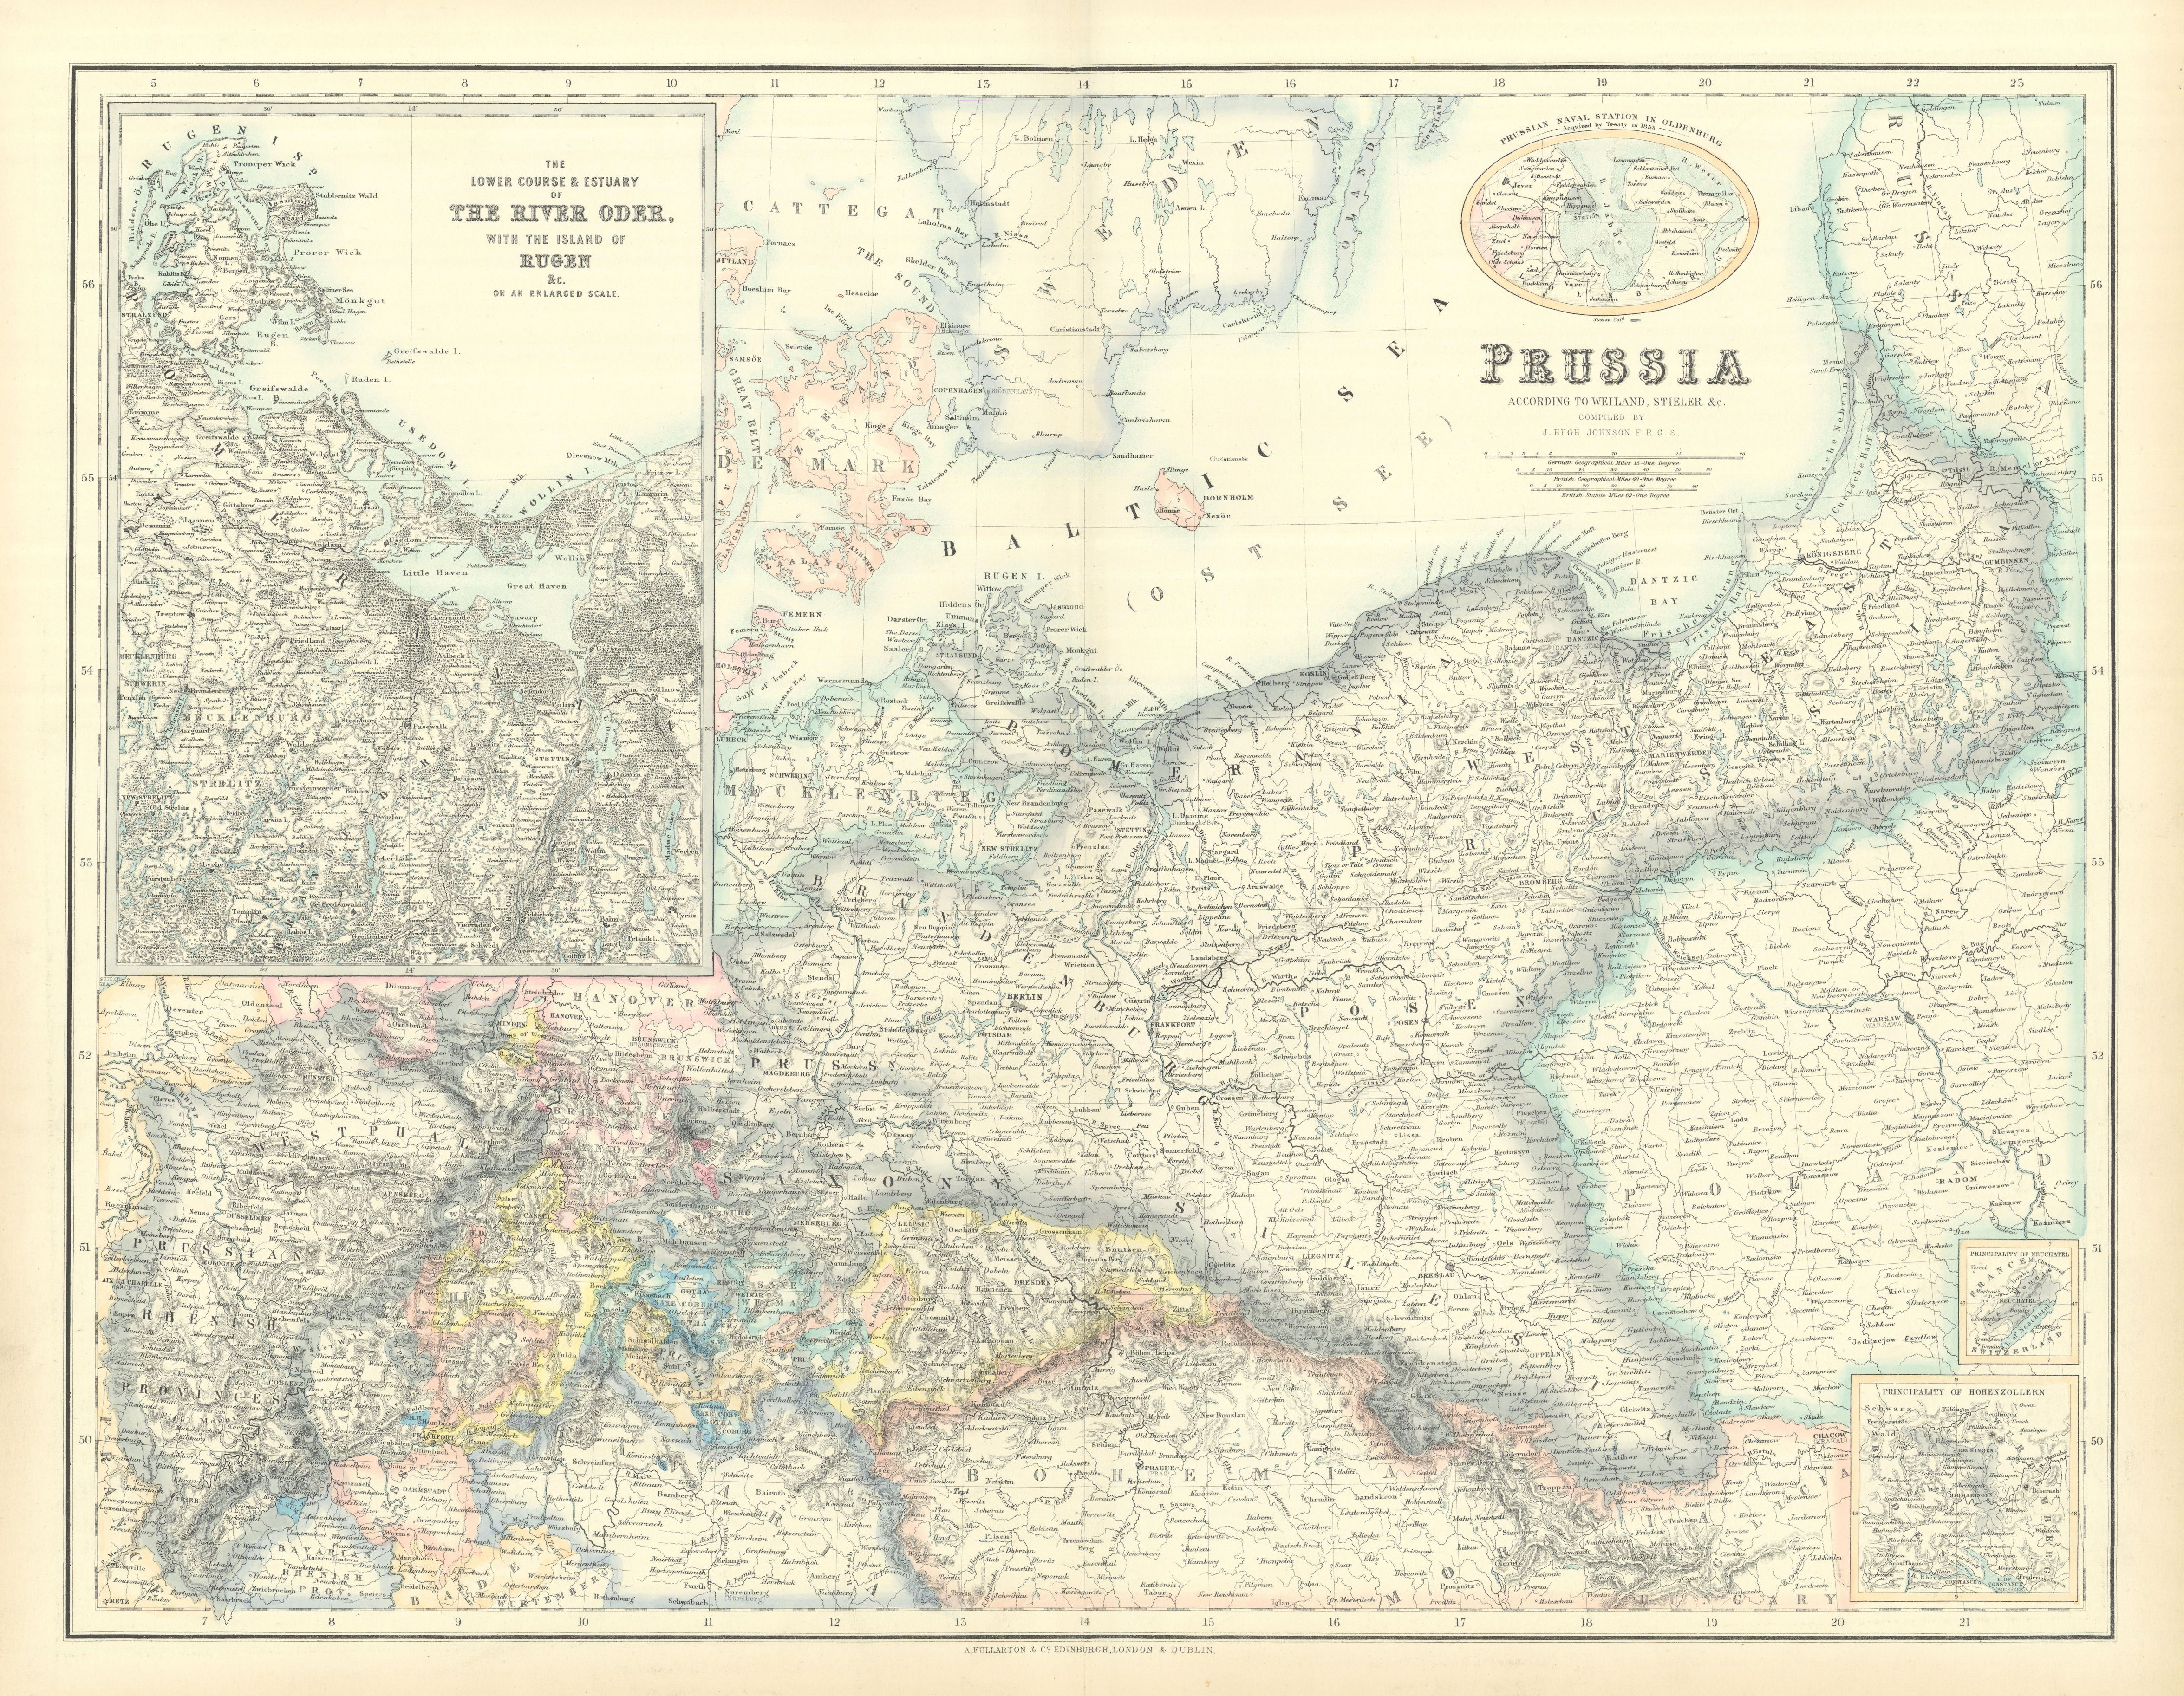 Associate Product Prussia. Oder estuary & Rugen. Eastern Germany & Poland. SWANSTON 1860 old map